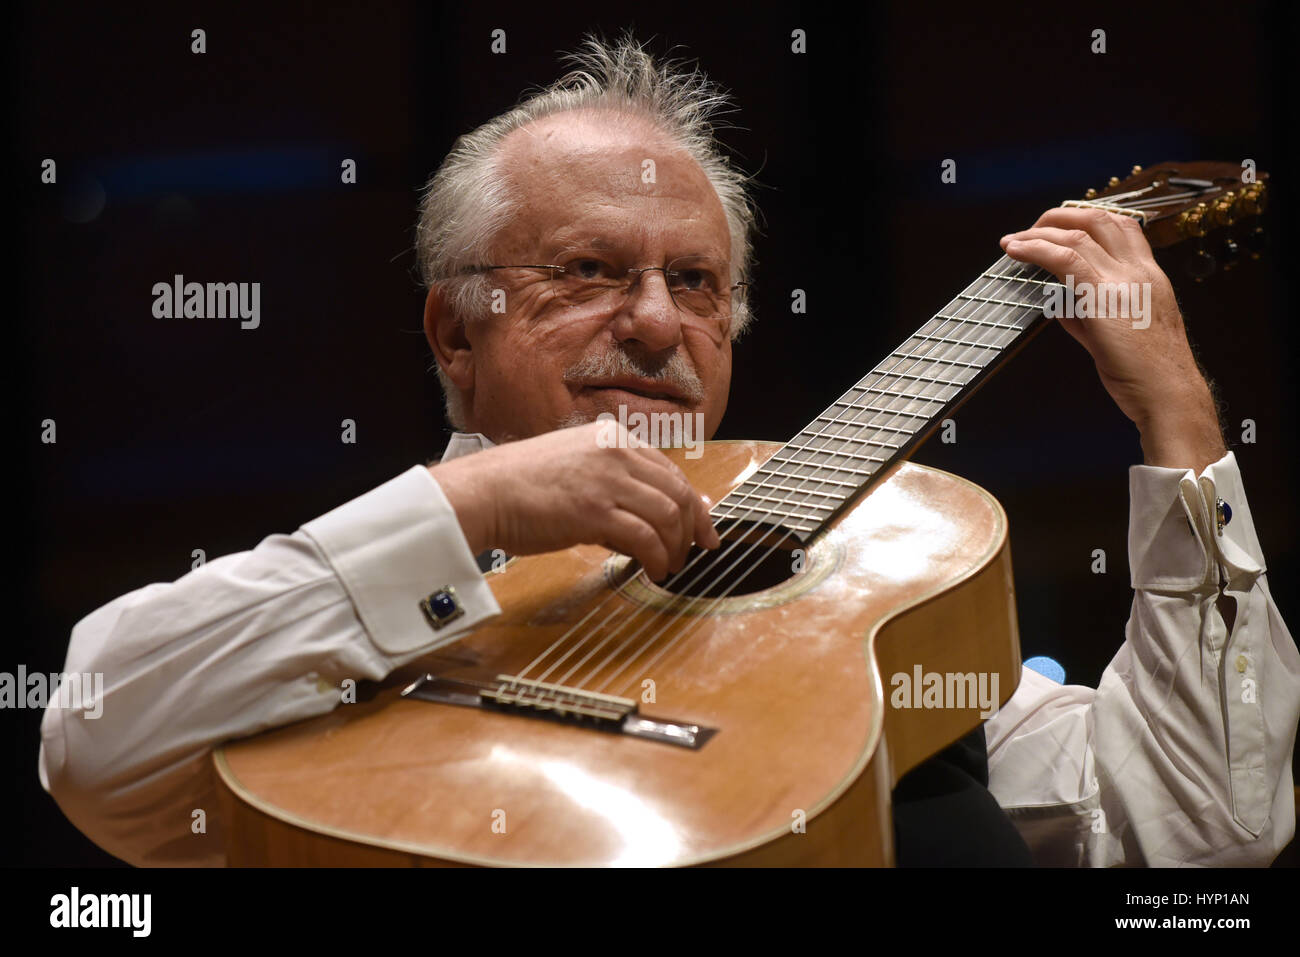 Duesseldorf, Germany. 05th Apr, 2017. Spanish guitarist Pepe Romero plays  guitar on stage during a soundcheck at Tonhalle in Duesseldorf, Germany, 05  April 2017. He was to be accompanied by the Munich